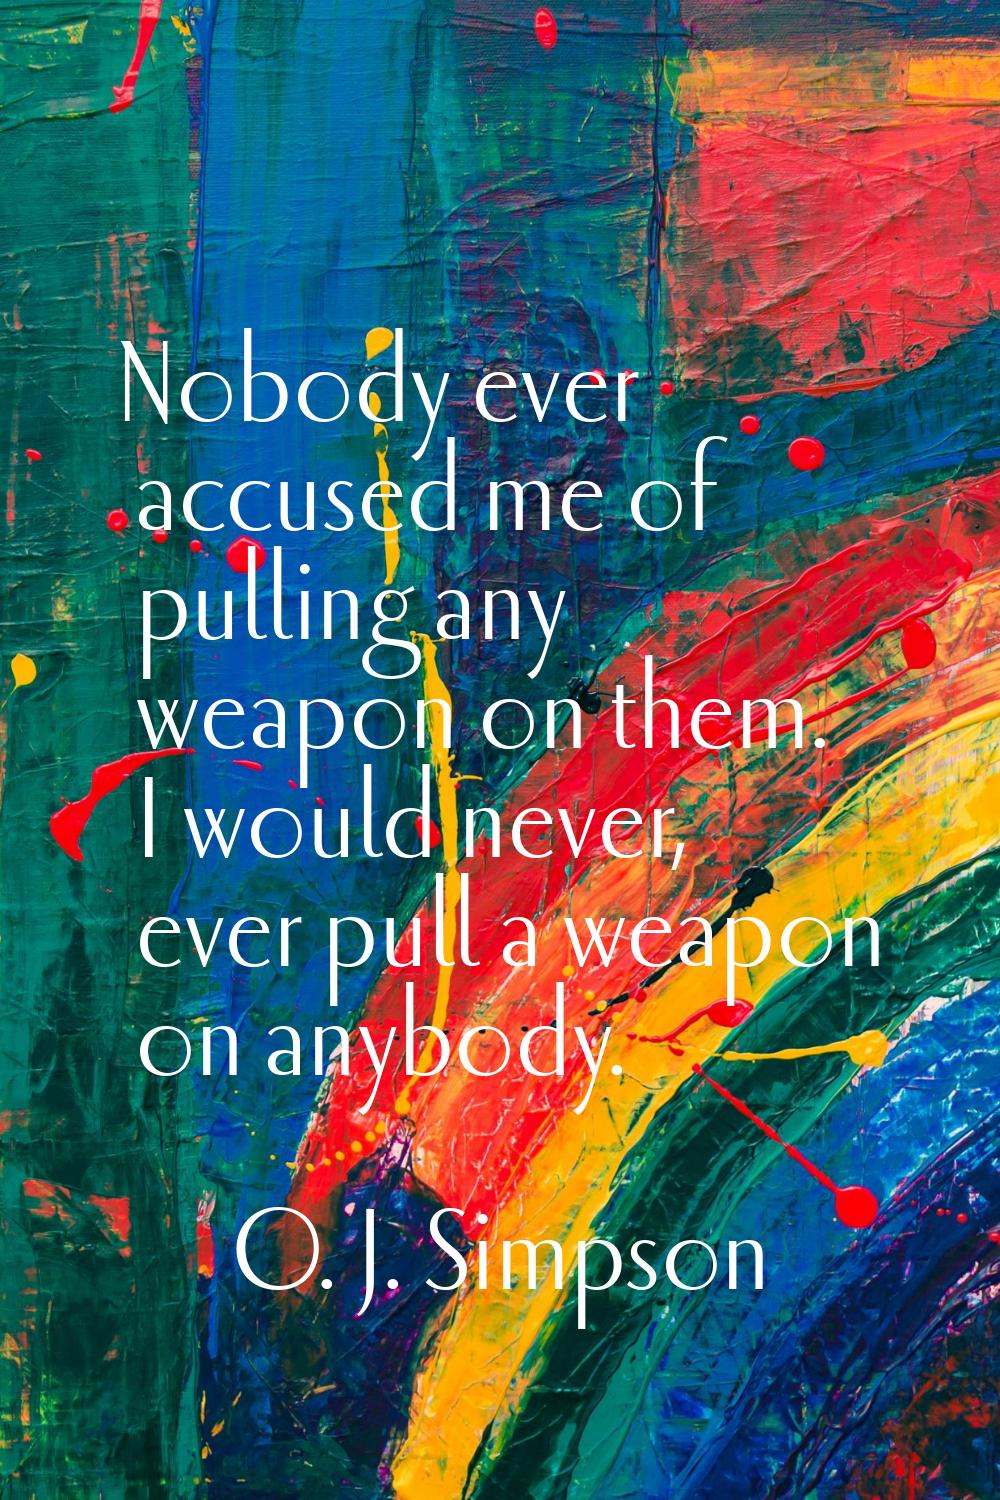 Nobody ever accused me of pulling any weapon on them. I would never, ever pull a weapon on anybody.